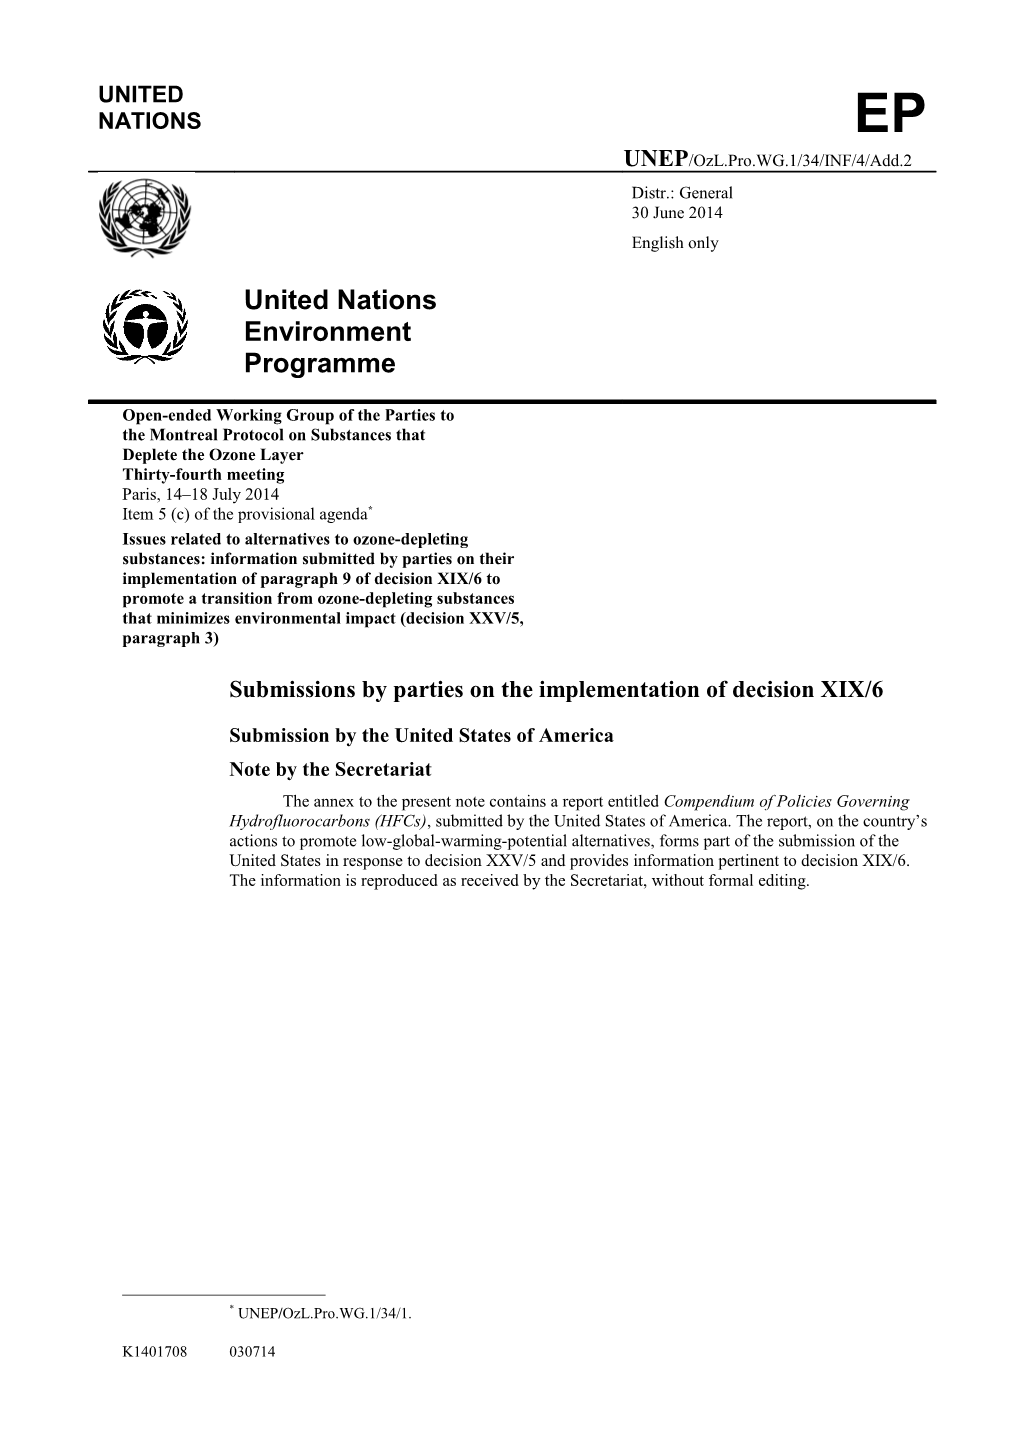 Submissions By Parties On The Implementation Of Decision XIX/6 - Submission By The United States Of America